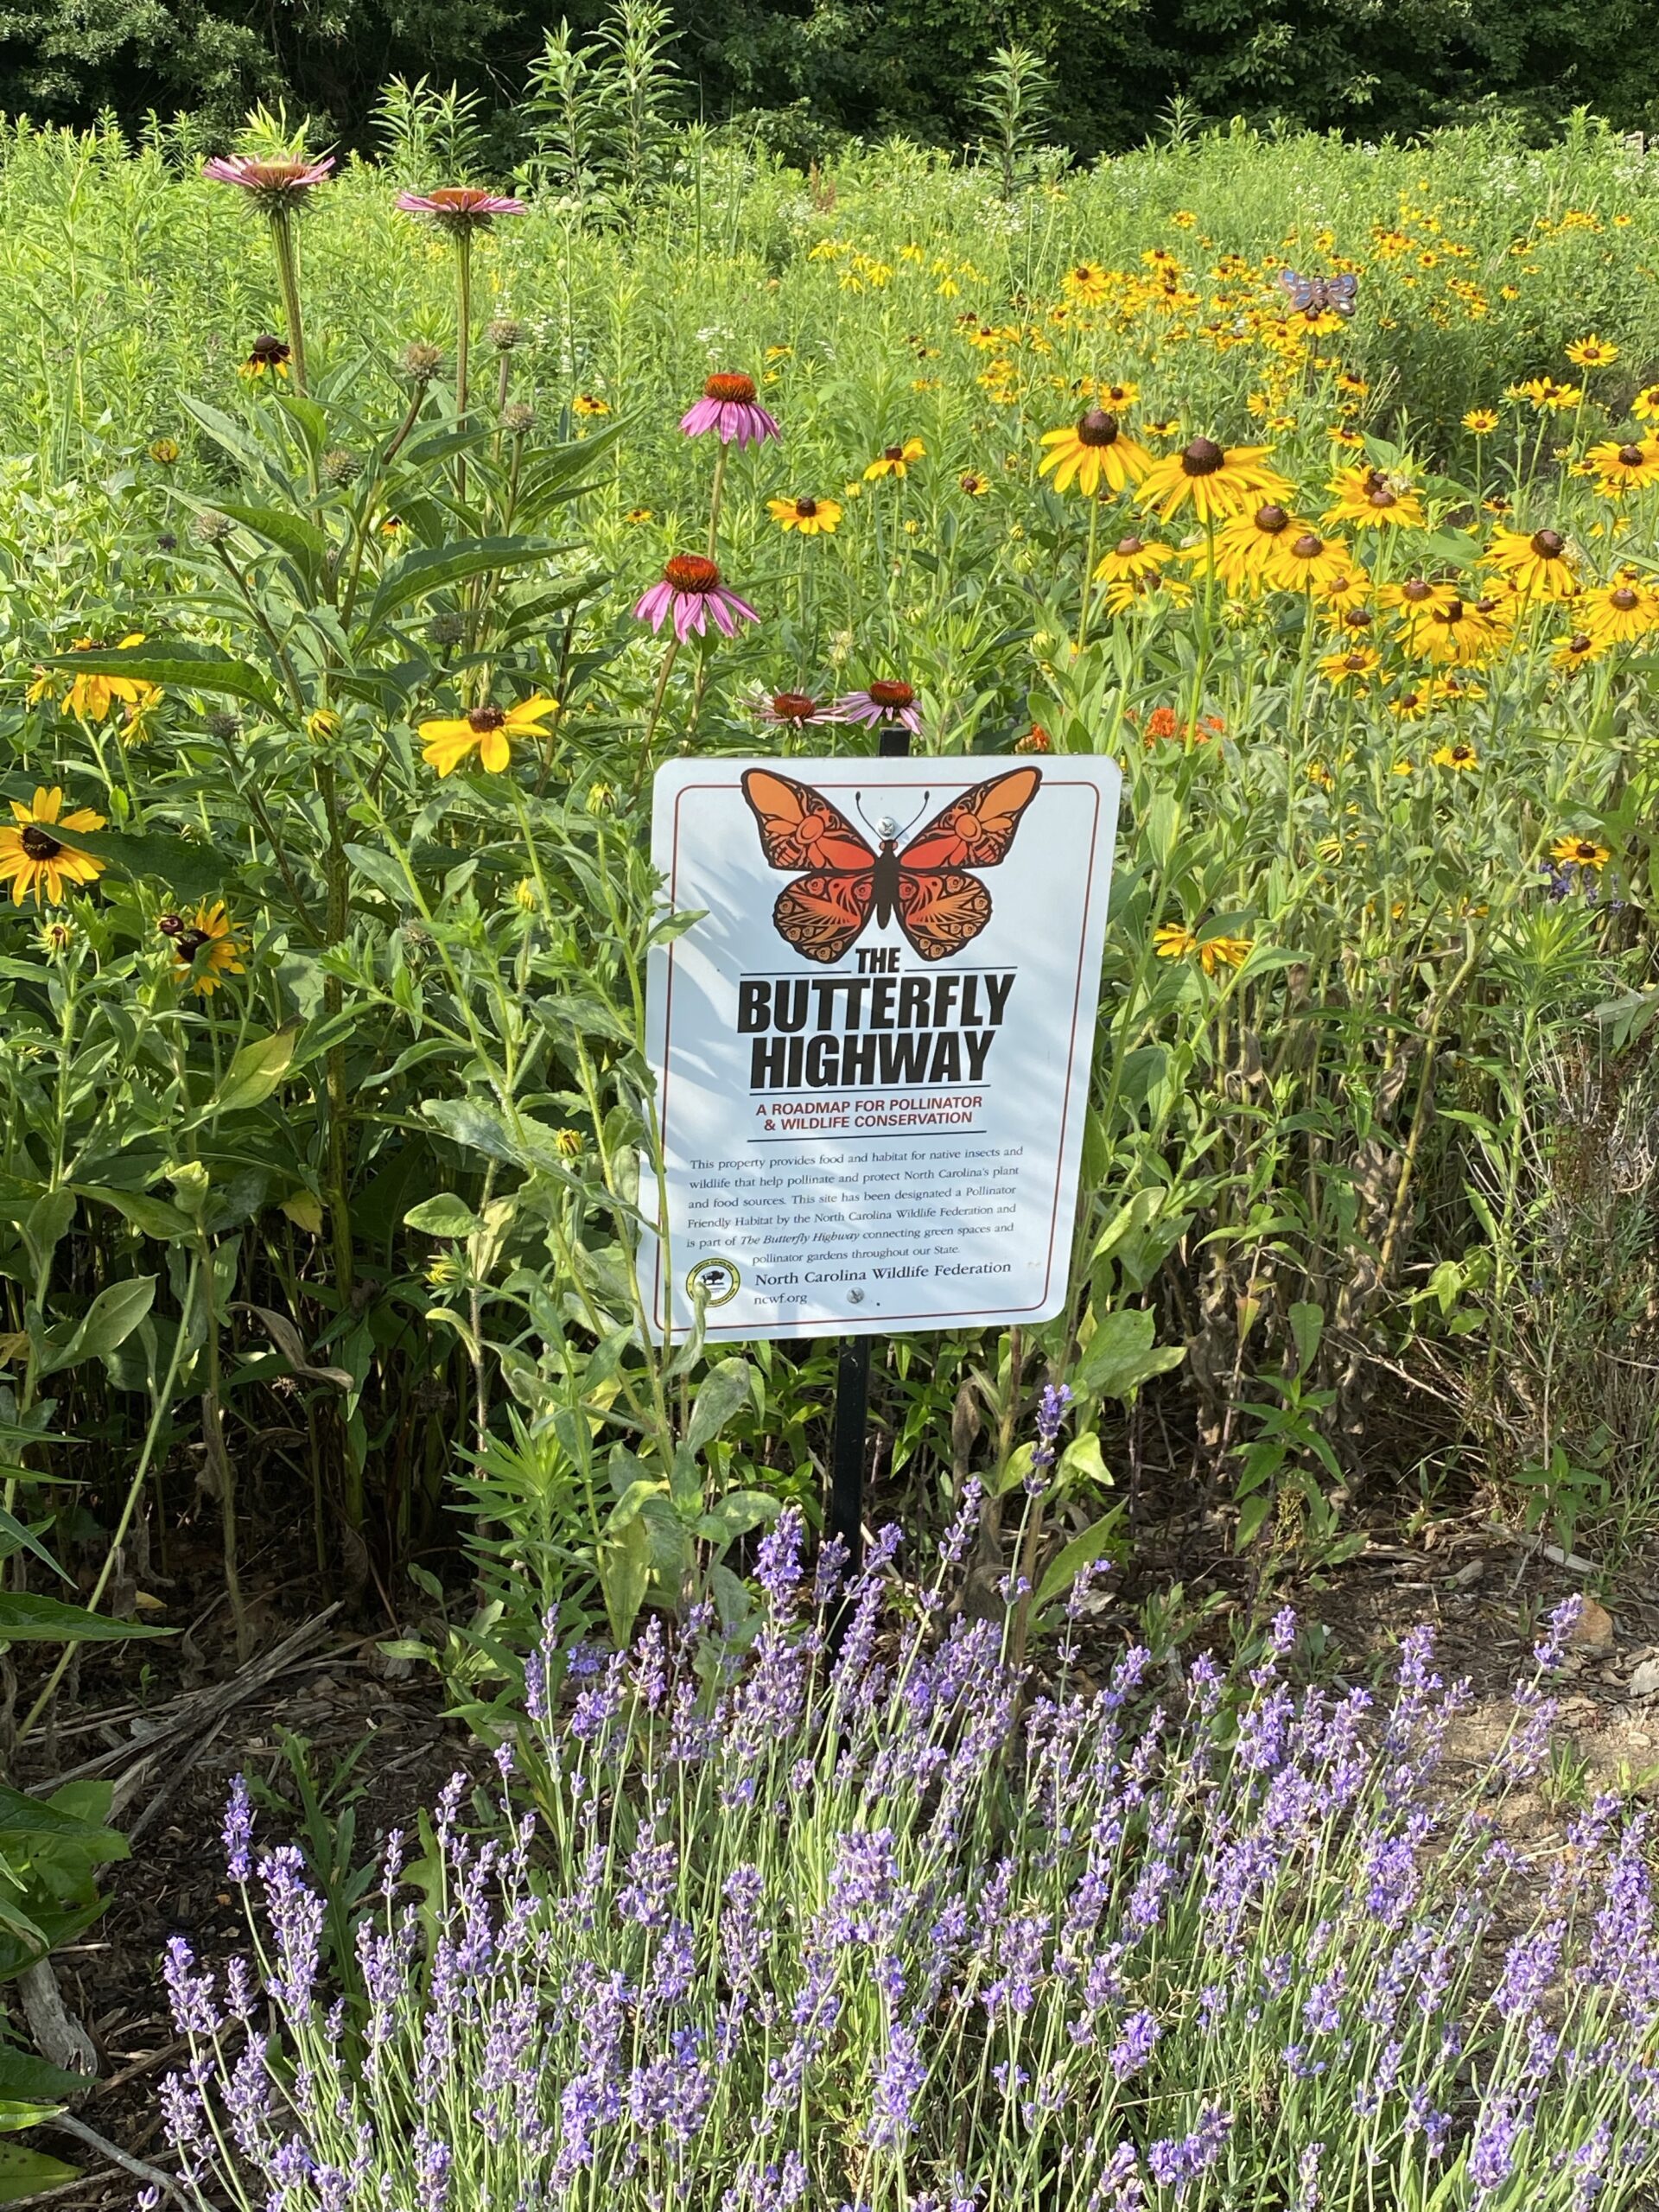 A Butterfly Highway yard sign in the middle of a pollinator garden.